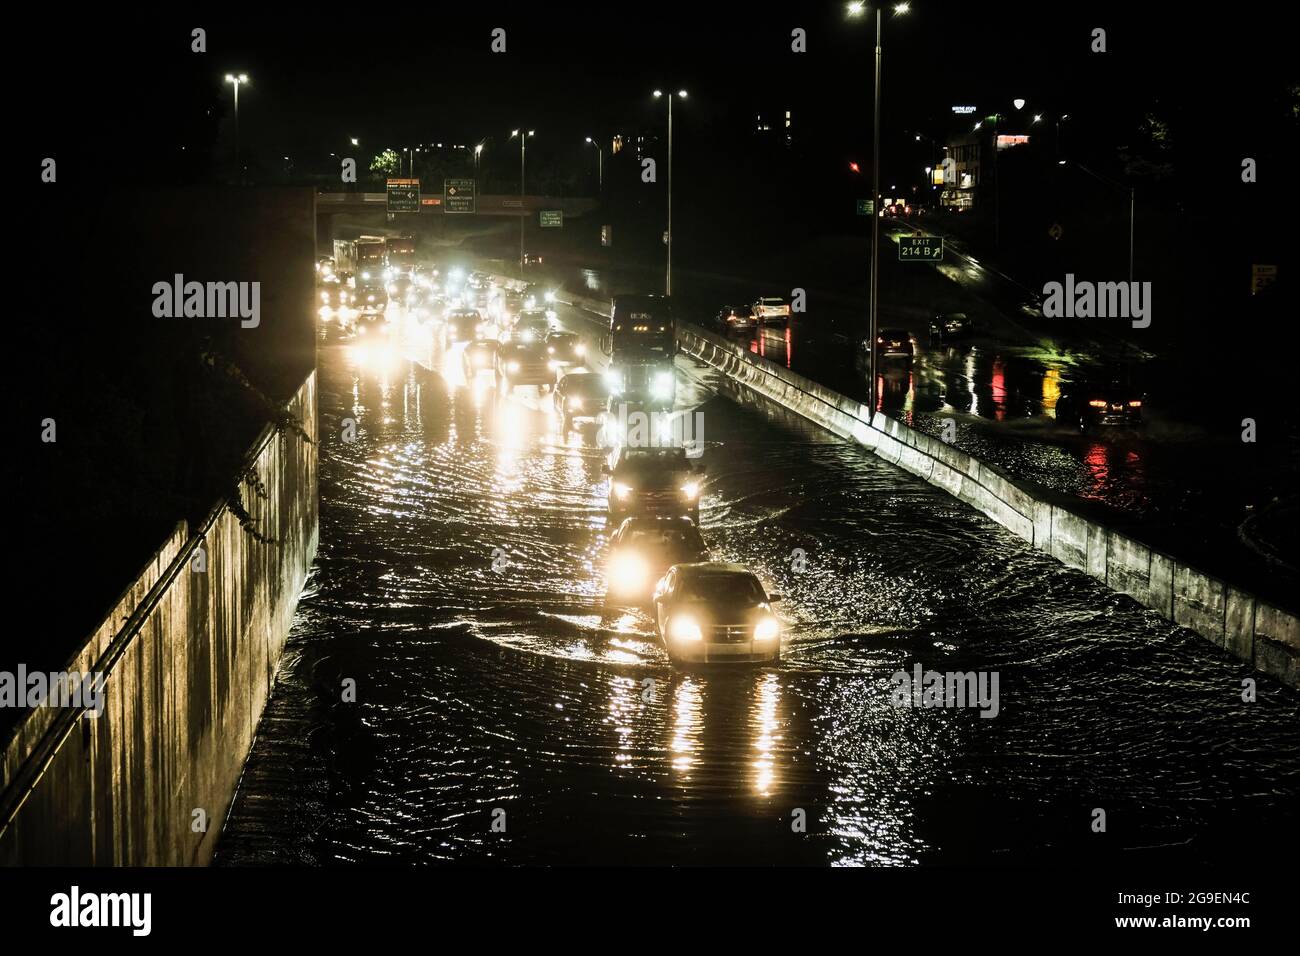 Detroit, United States. 24th July, 2021. Vehicles cautiously drive through floodwaters on I-94 following a severe storm system that caused flash flooding on main roadways in Detroit. Severe storms across South East Michigan caused major damage and significant flooding in parts of Detroit and surrounding areas for the third time in a month. Multiple highways were shut down due to floodwaters and residents reported a tornado damaging part of Armada, Michigan. Credit: SOPA Images Limited/Alamy Live News Stock Photo